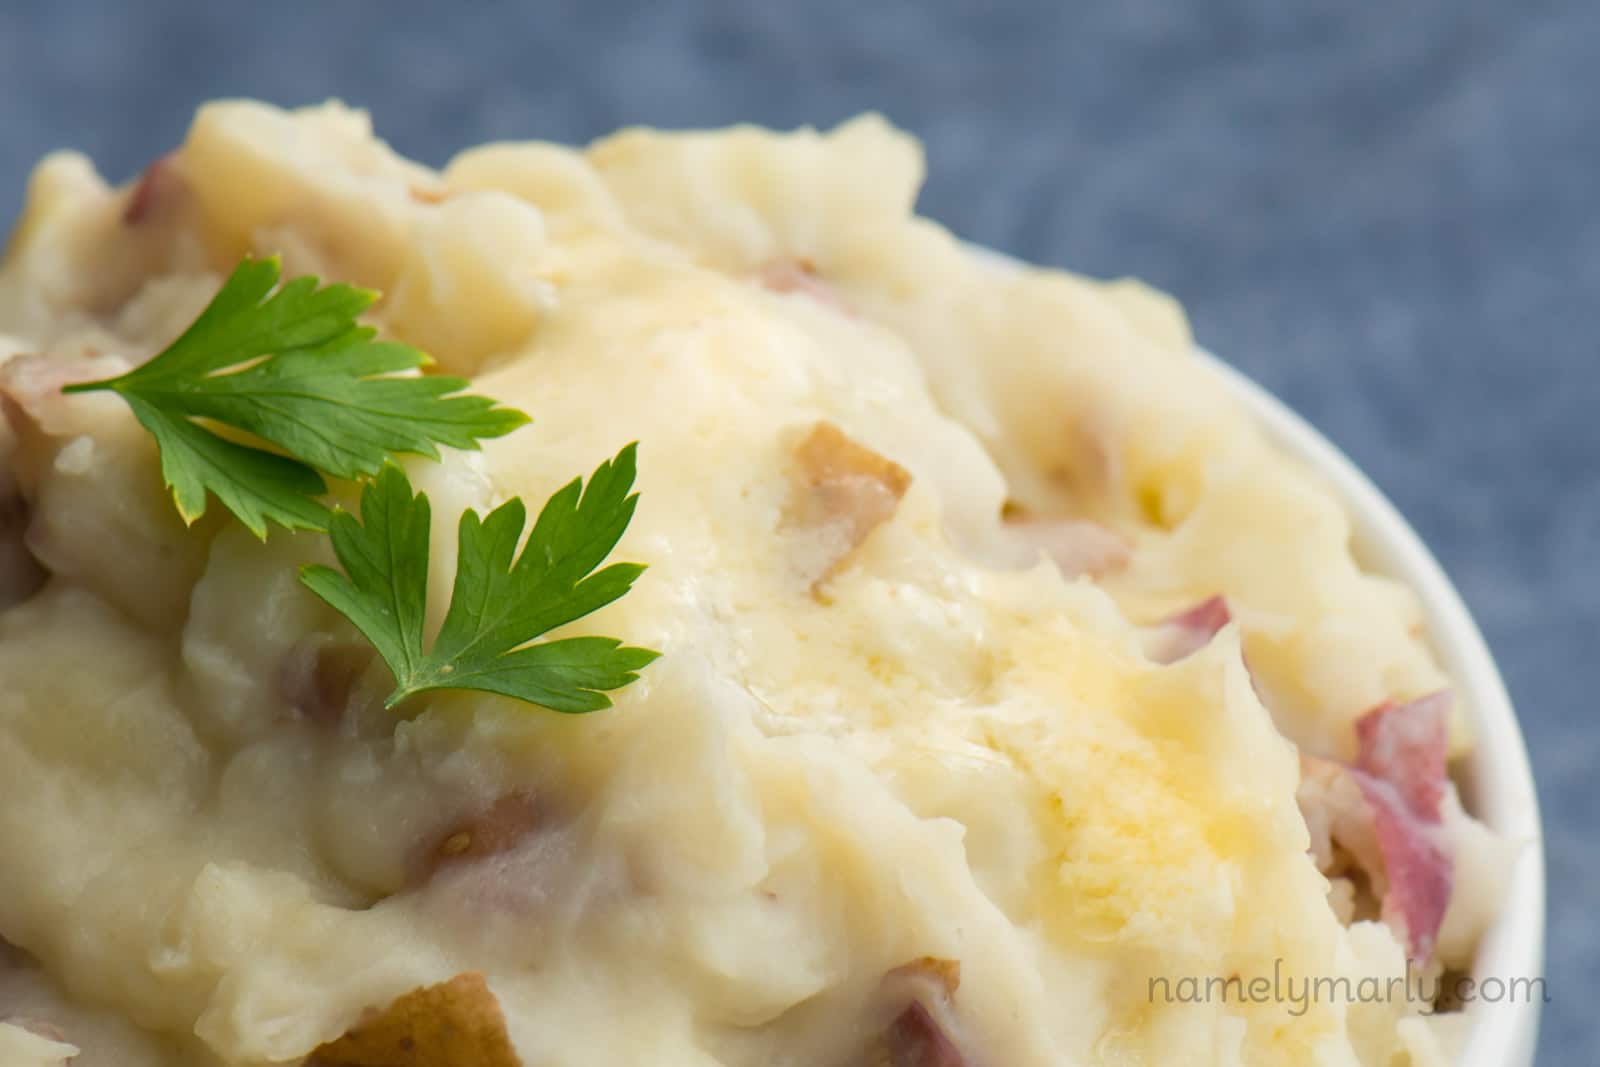 A mound of Vegan Chunky Garlic Mashed Potatoes with parsley on top.